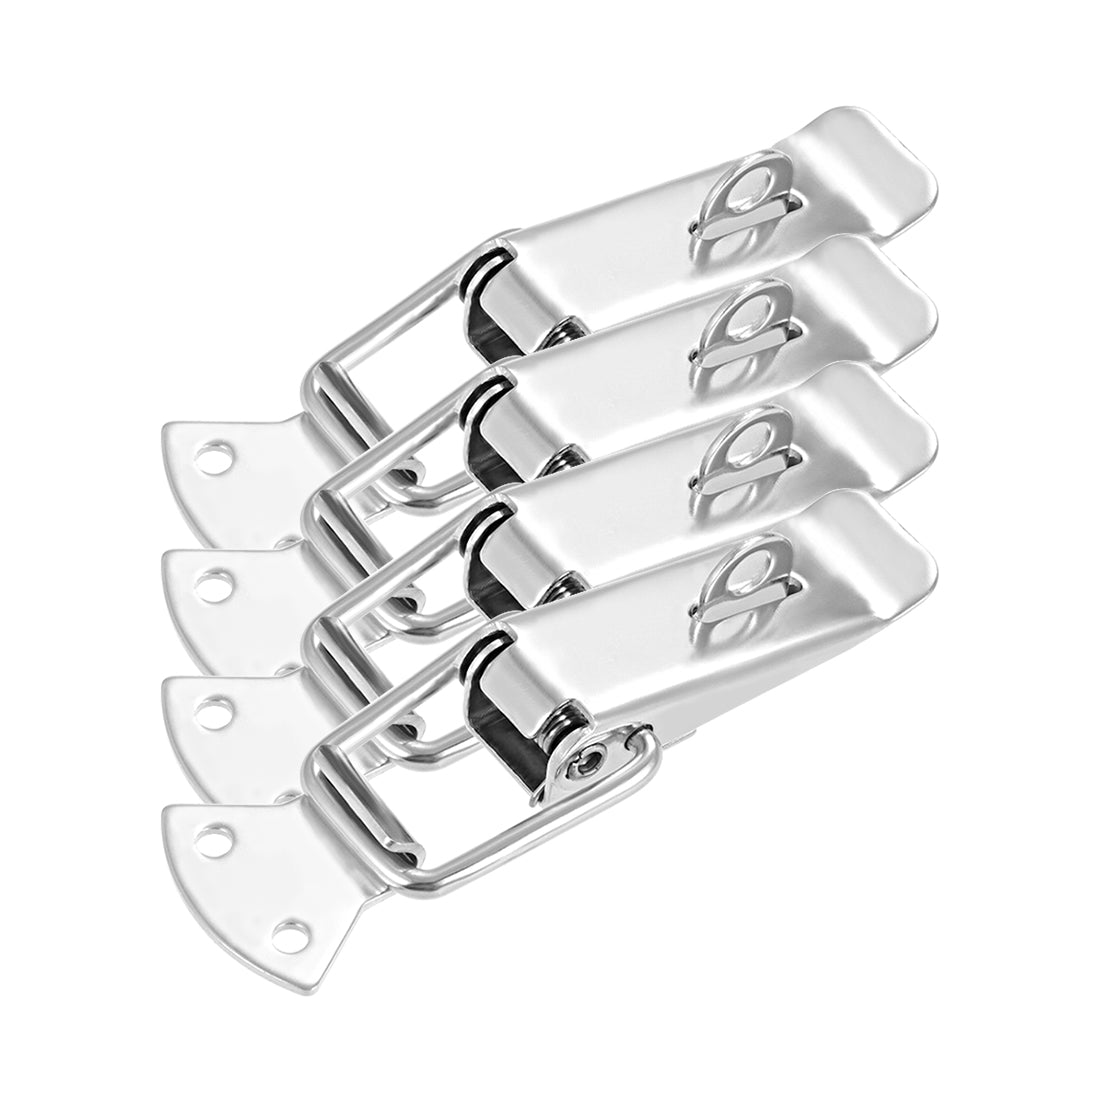 uxcell Uxcell 201 Stainless Steel Spring Loaded Toggle Case Box Chest Trunk Latch Catches Hasps Clamp 4 pcs, 127mm Overall Length